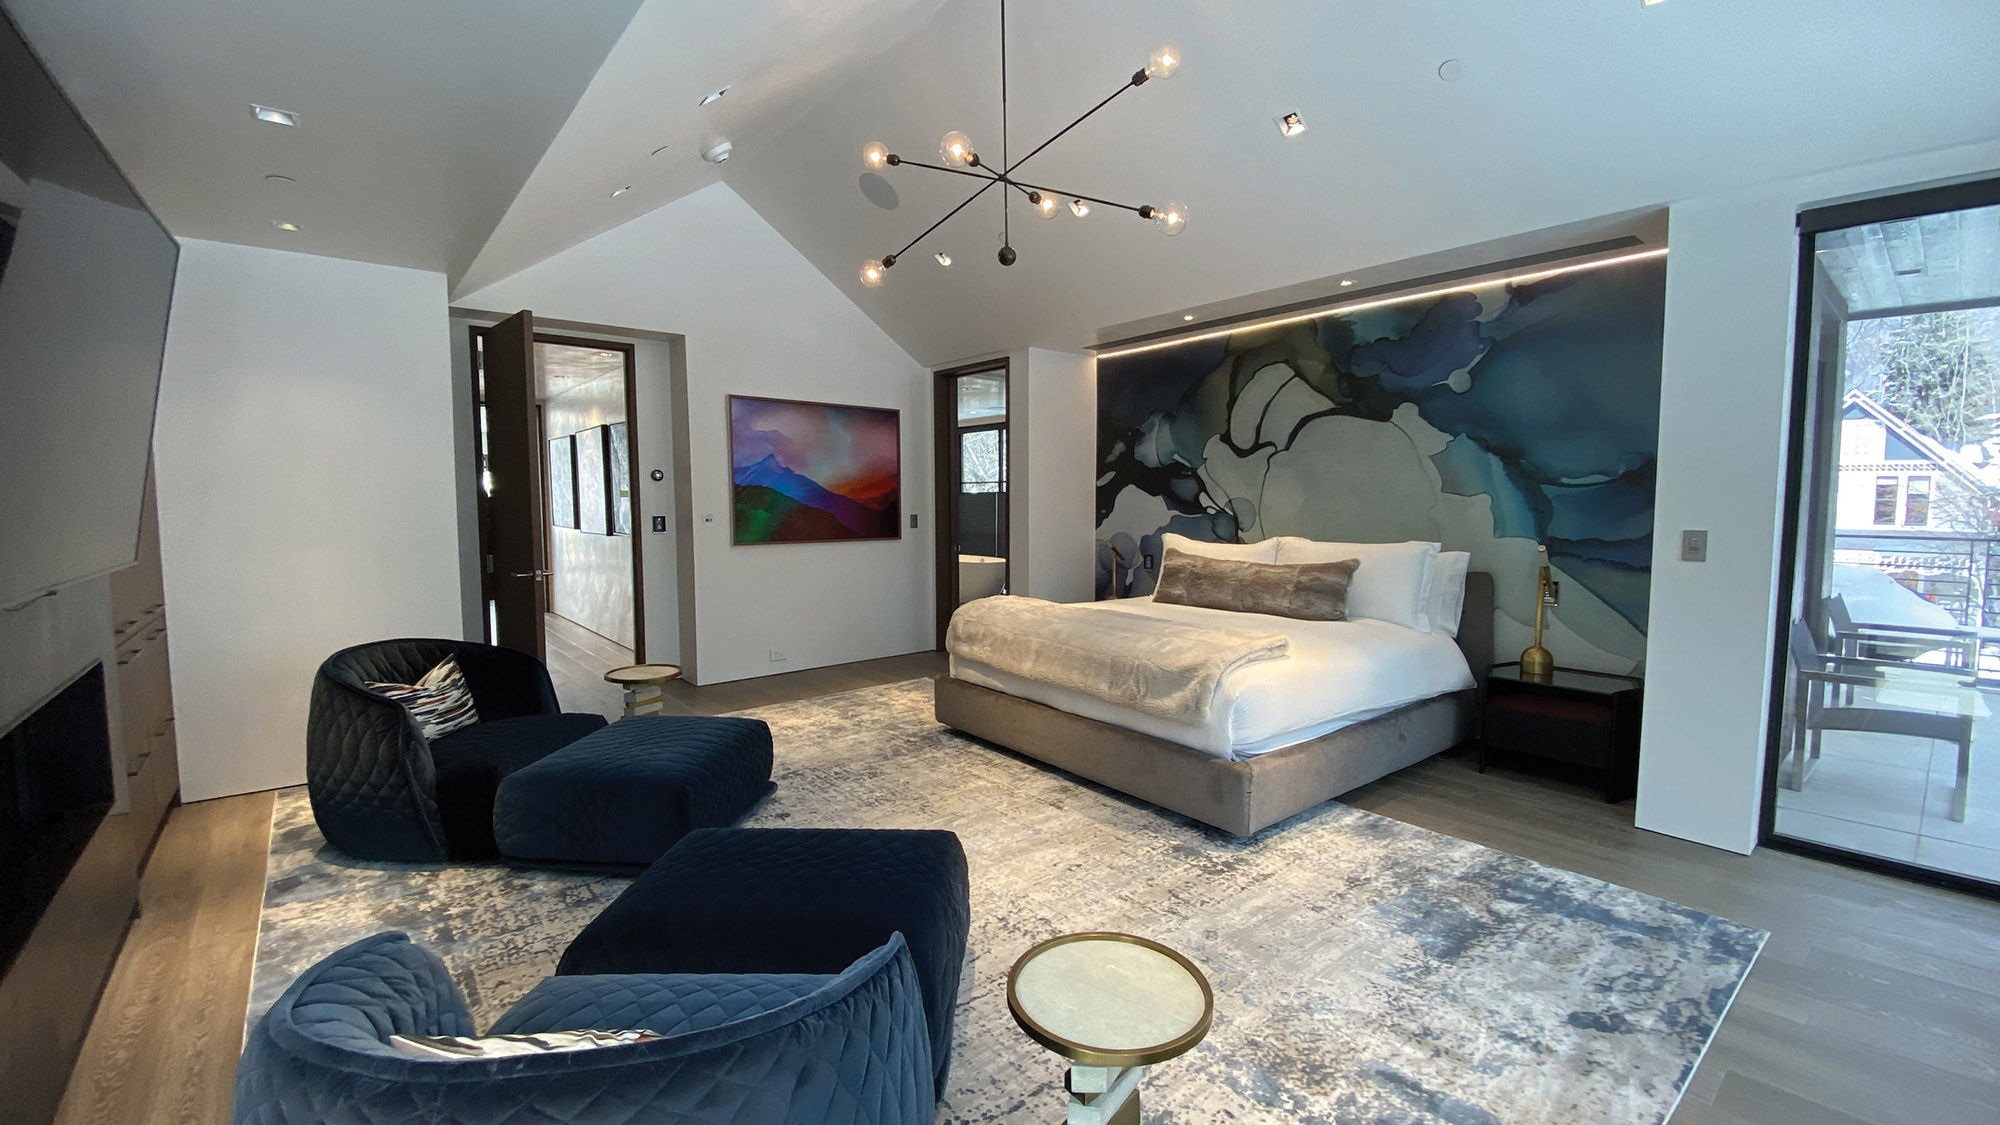 The master bedroom at the Aspen Street Lodge.